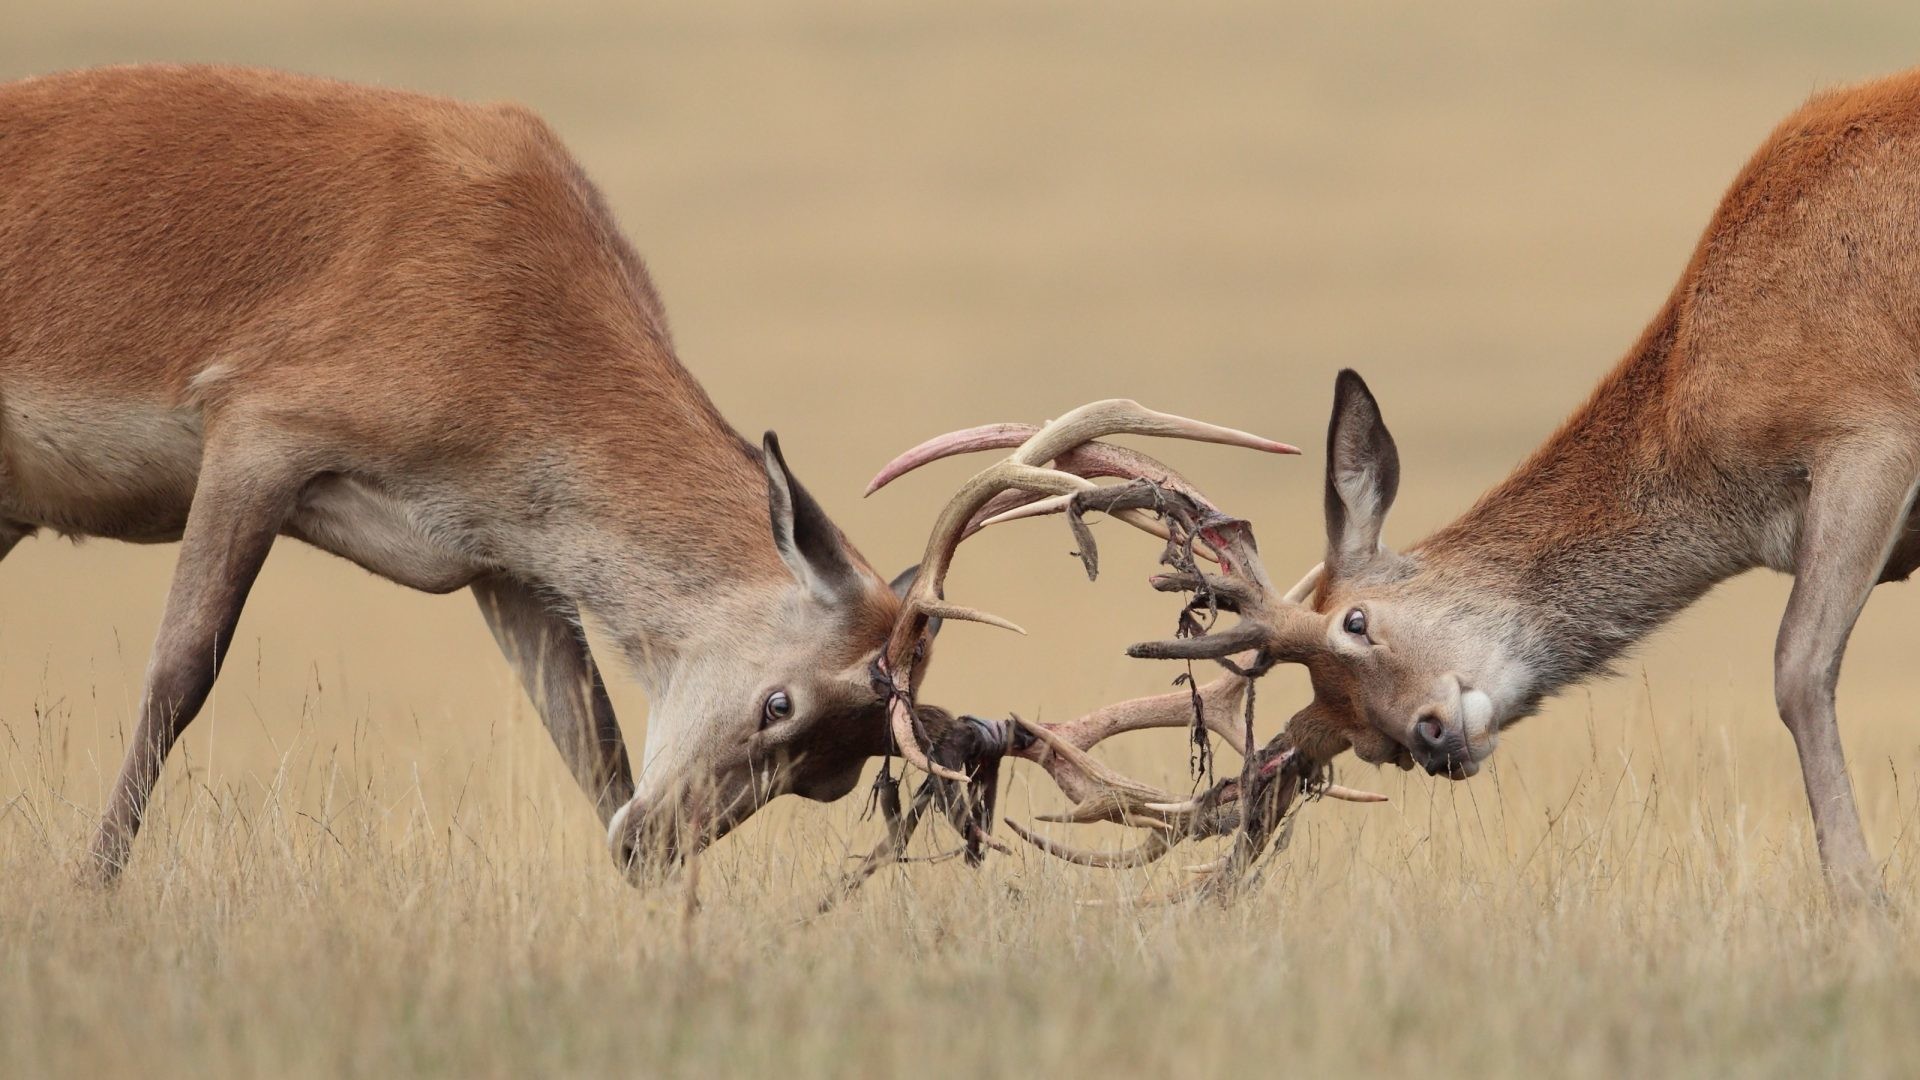 1920x1080 Deer Tag - Animals Horns Fight Two Deer Wallpaper Of Cute For Mobile for HD  16